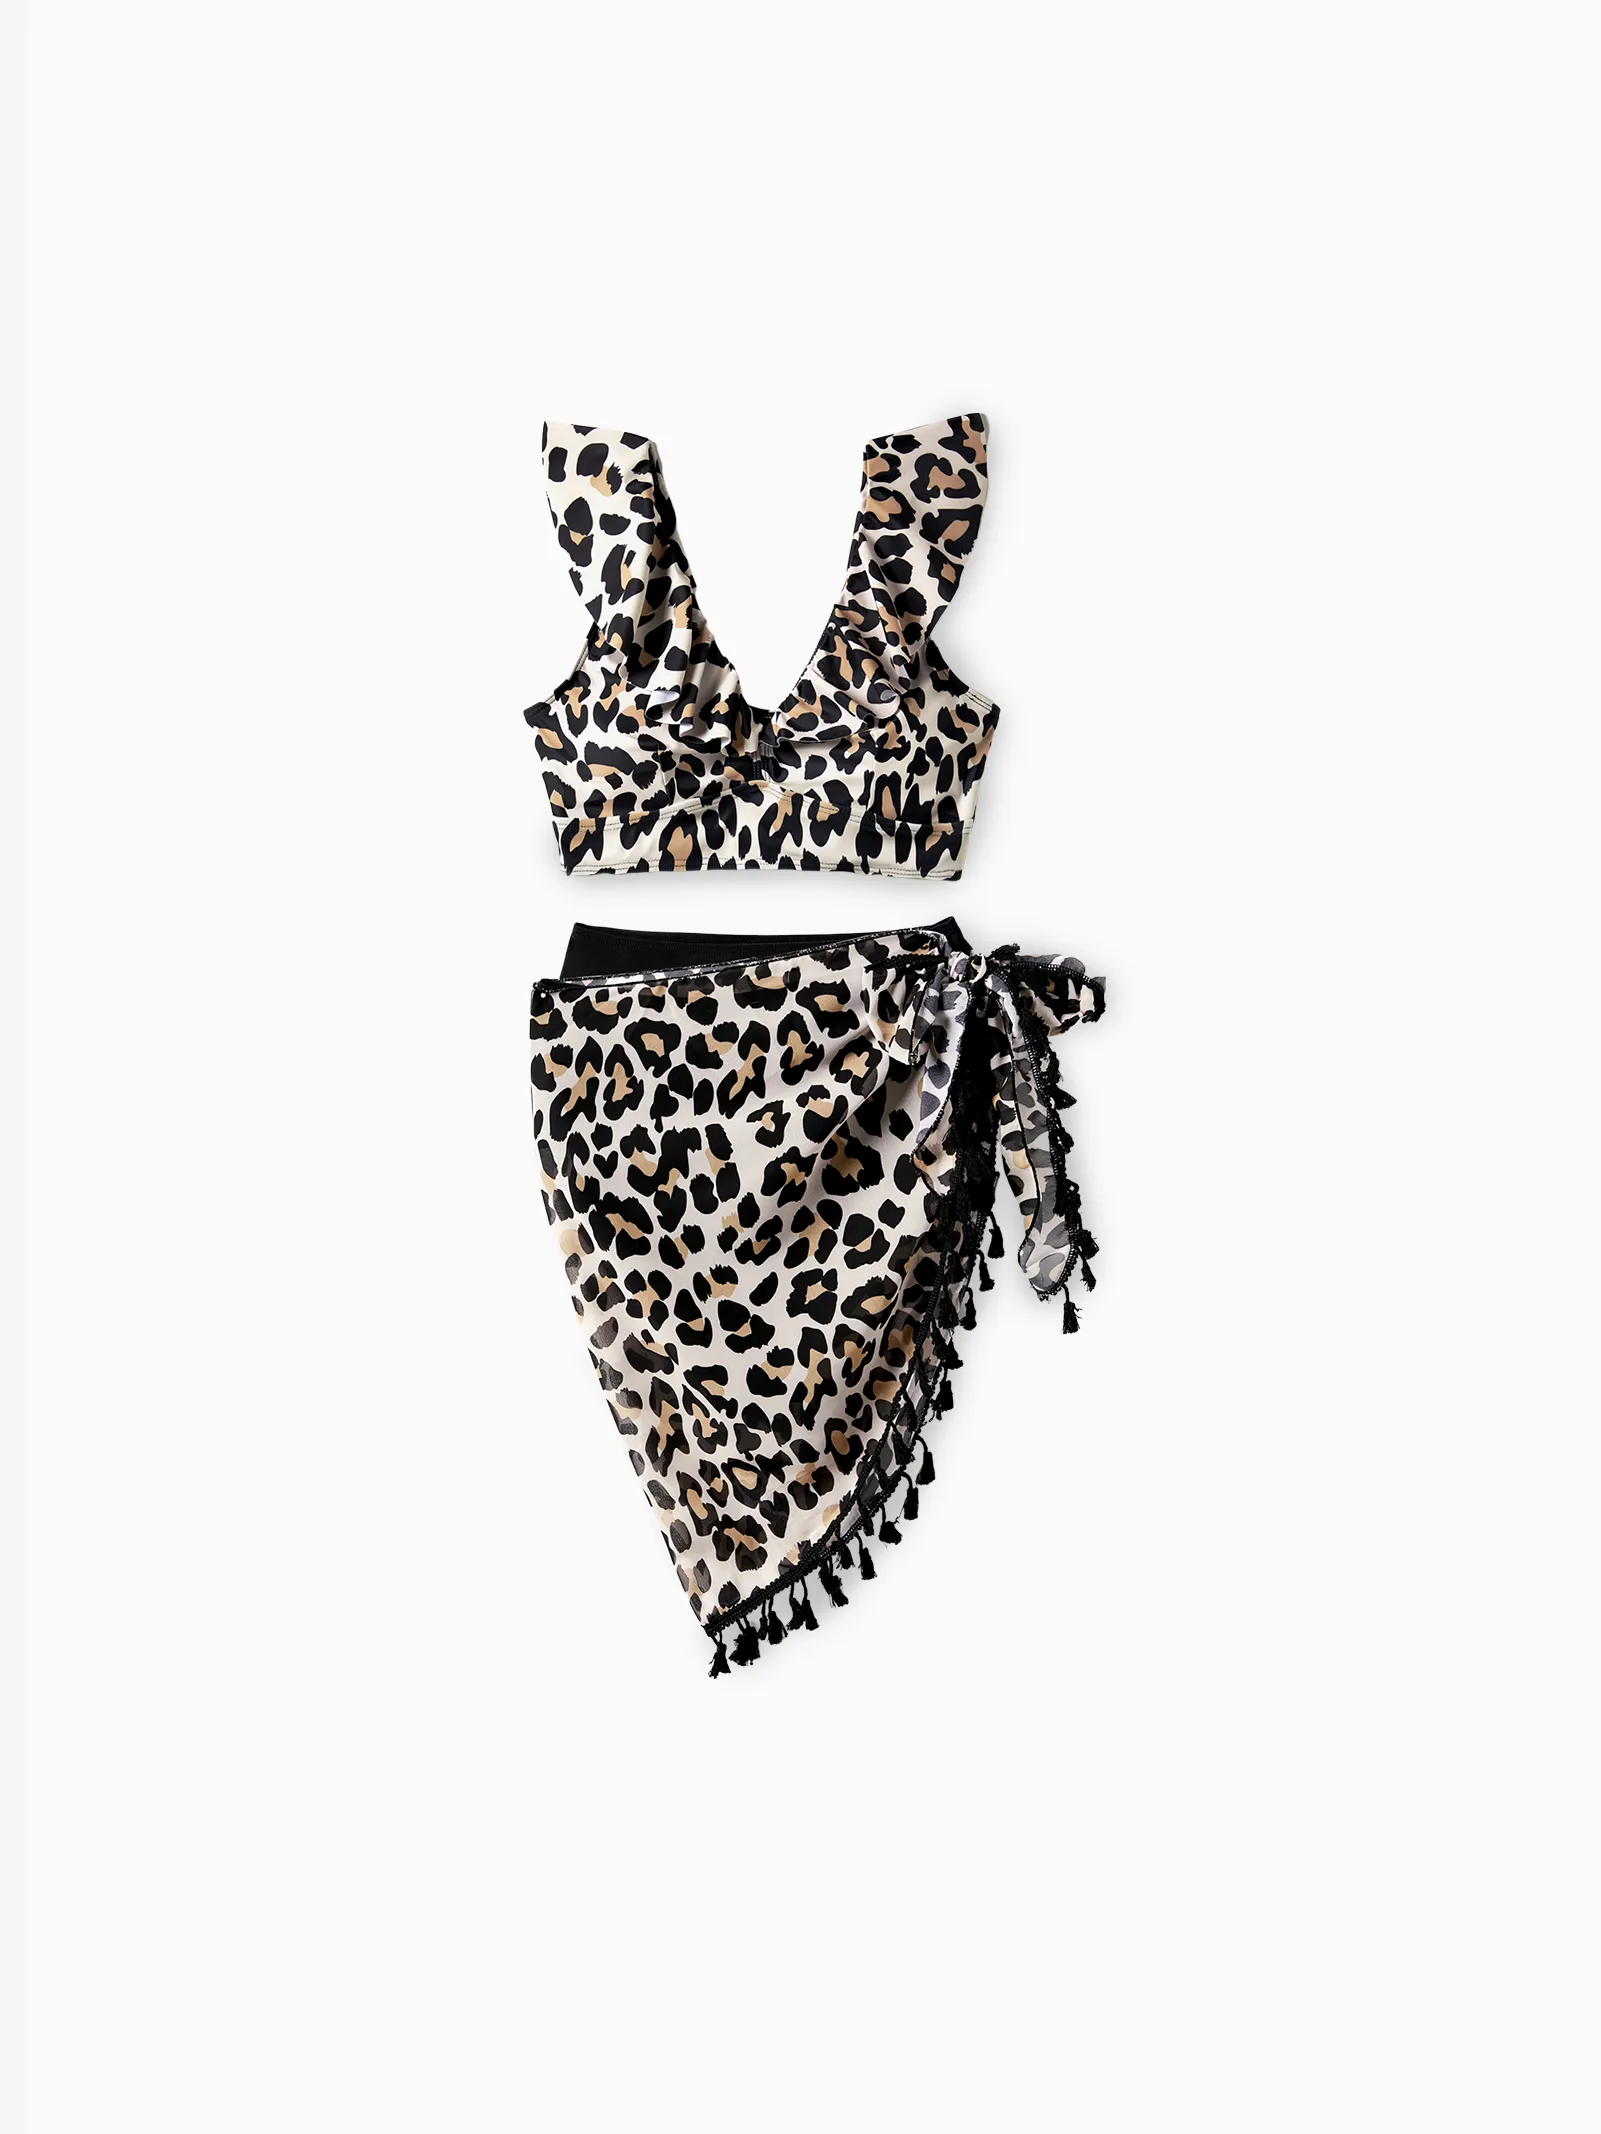 

Family Matching Leopard Pattern Drawstring Swim Trunks or Ruffle Neck Two-Piece Bikini with Optional Cover Up Sarong Skirt